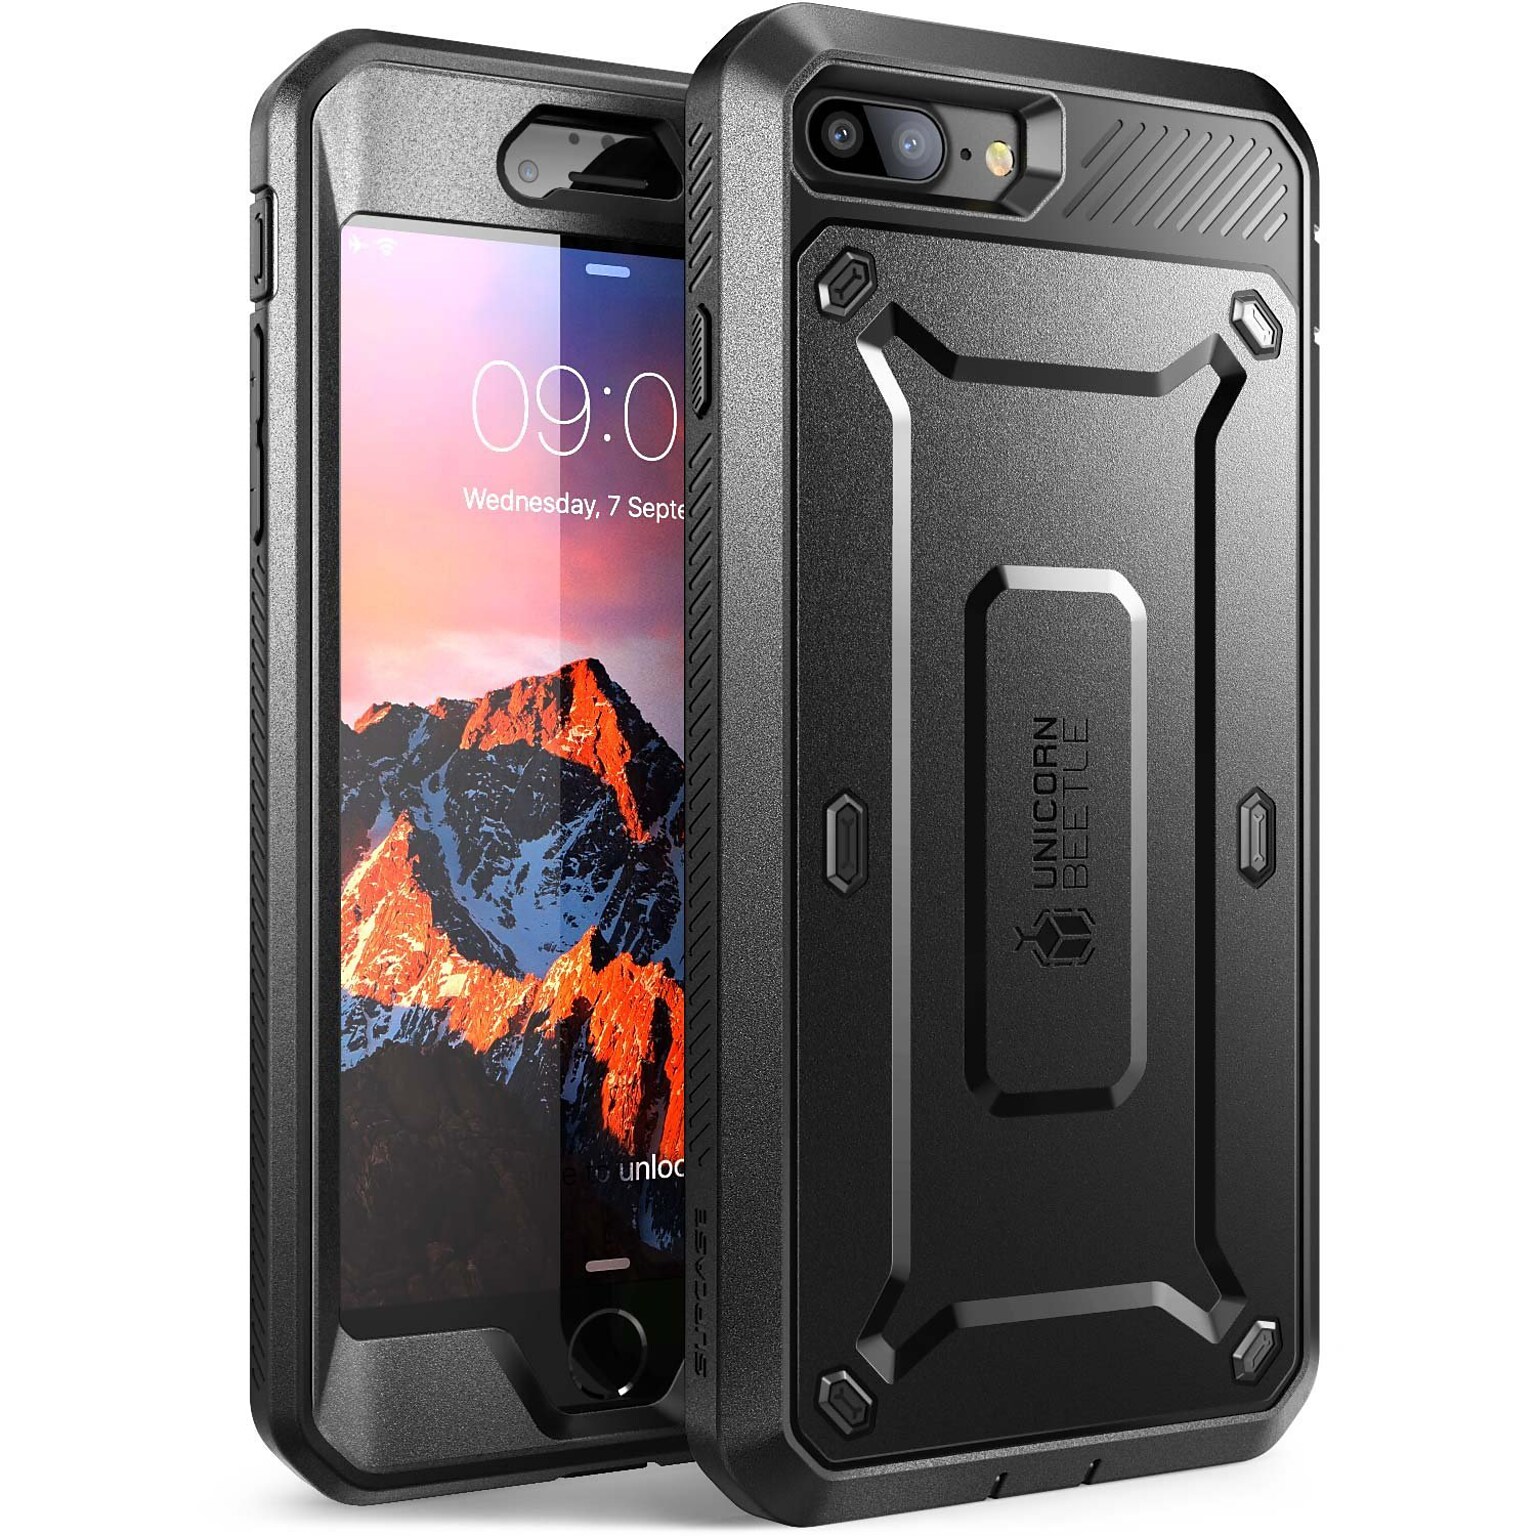 SUPCASE Apple iPhone 7 Unicorn Beetle Pro Series Fullbody Protective Case with Screen and Holster - Black/Black (752454312924)